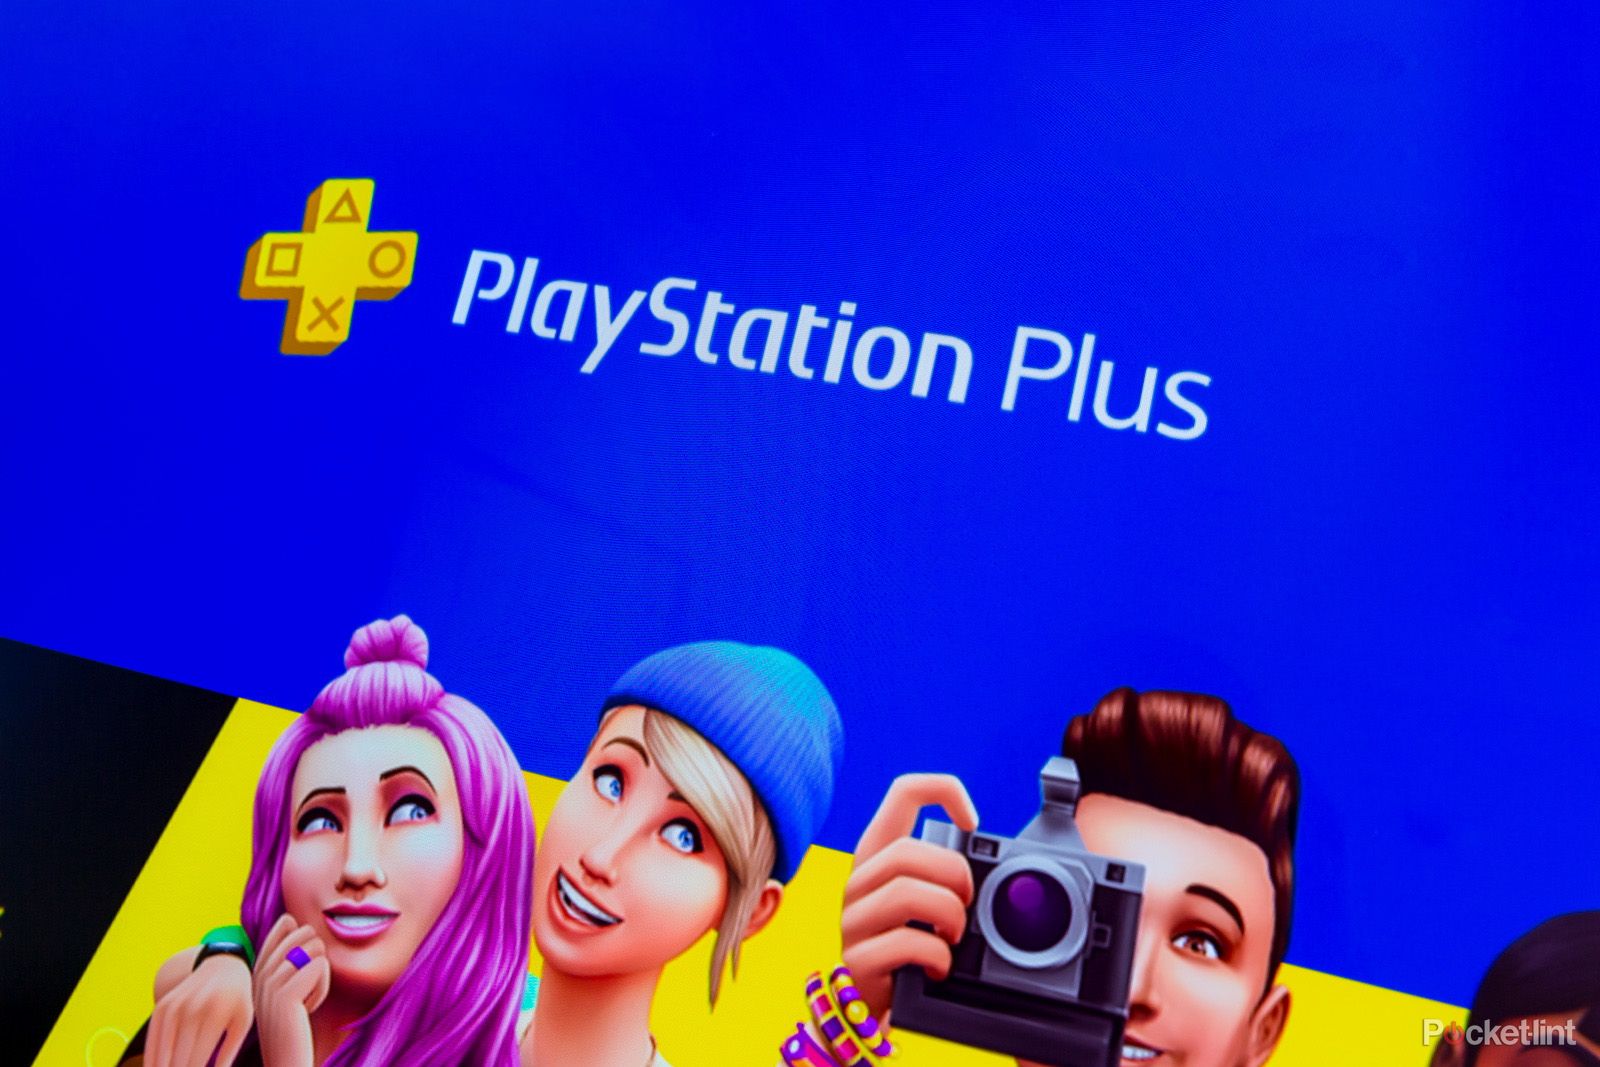 PS Plus weekend - you can play multiplayer online games free